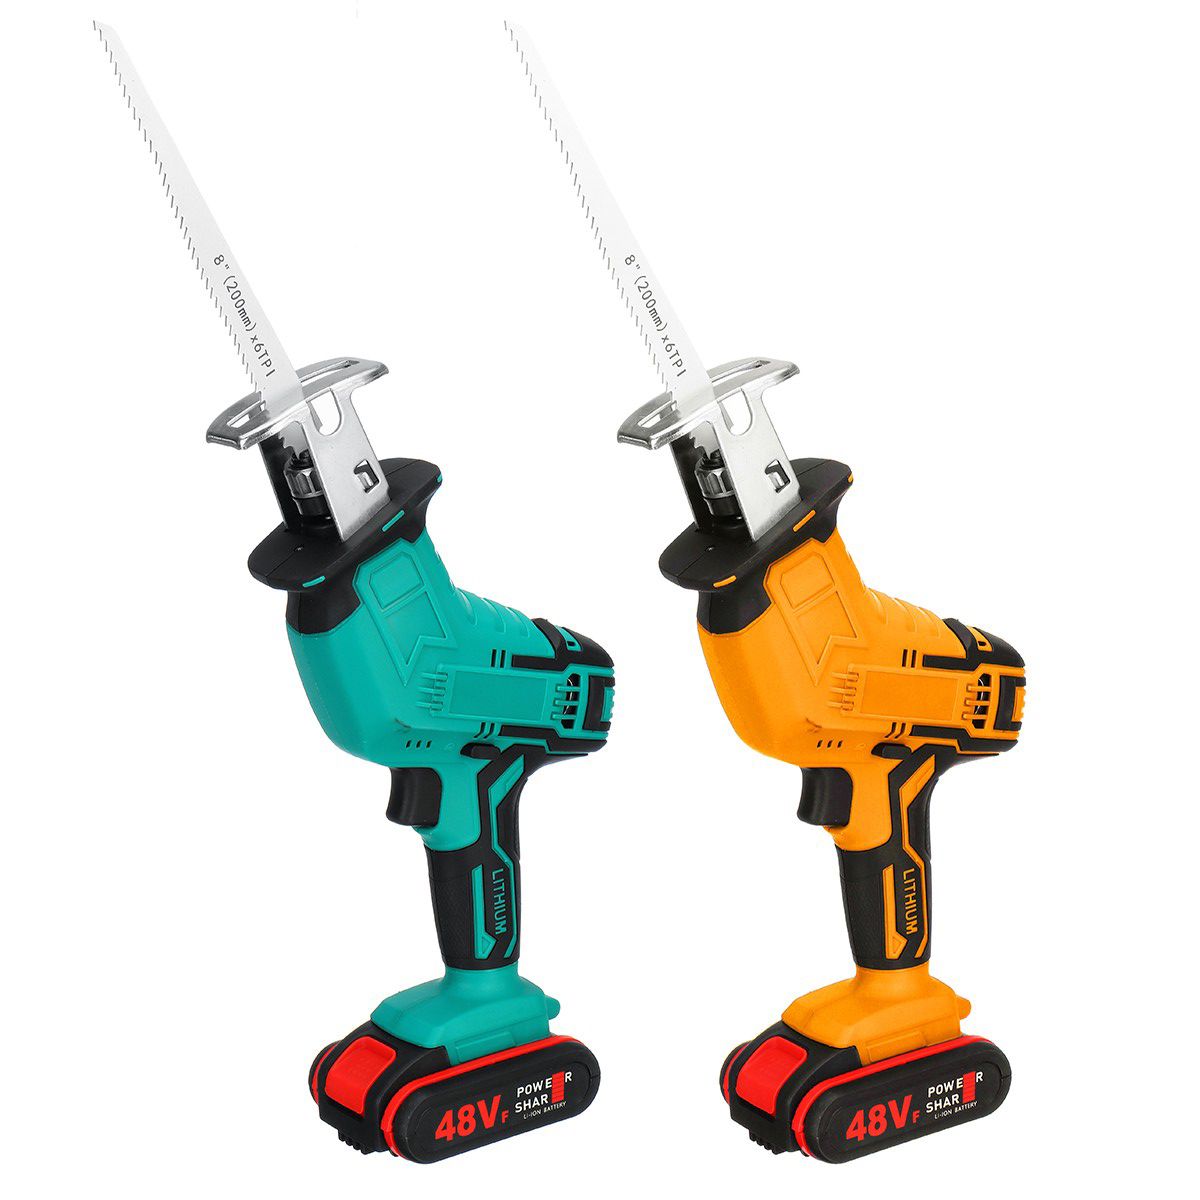 Electric-Cordless-Reciprocating-Saw-4-Blades-Battery-Charger-Saw-Power-Tool-1732002